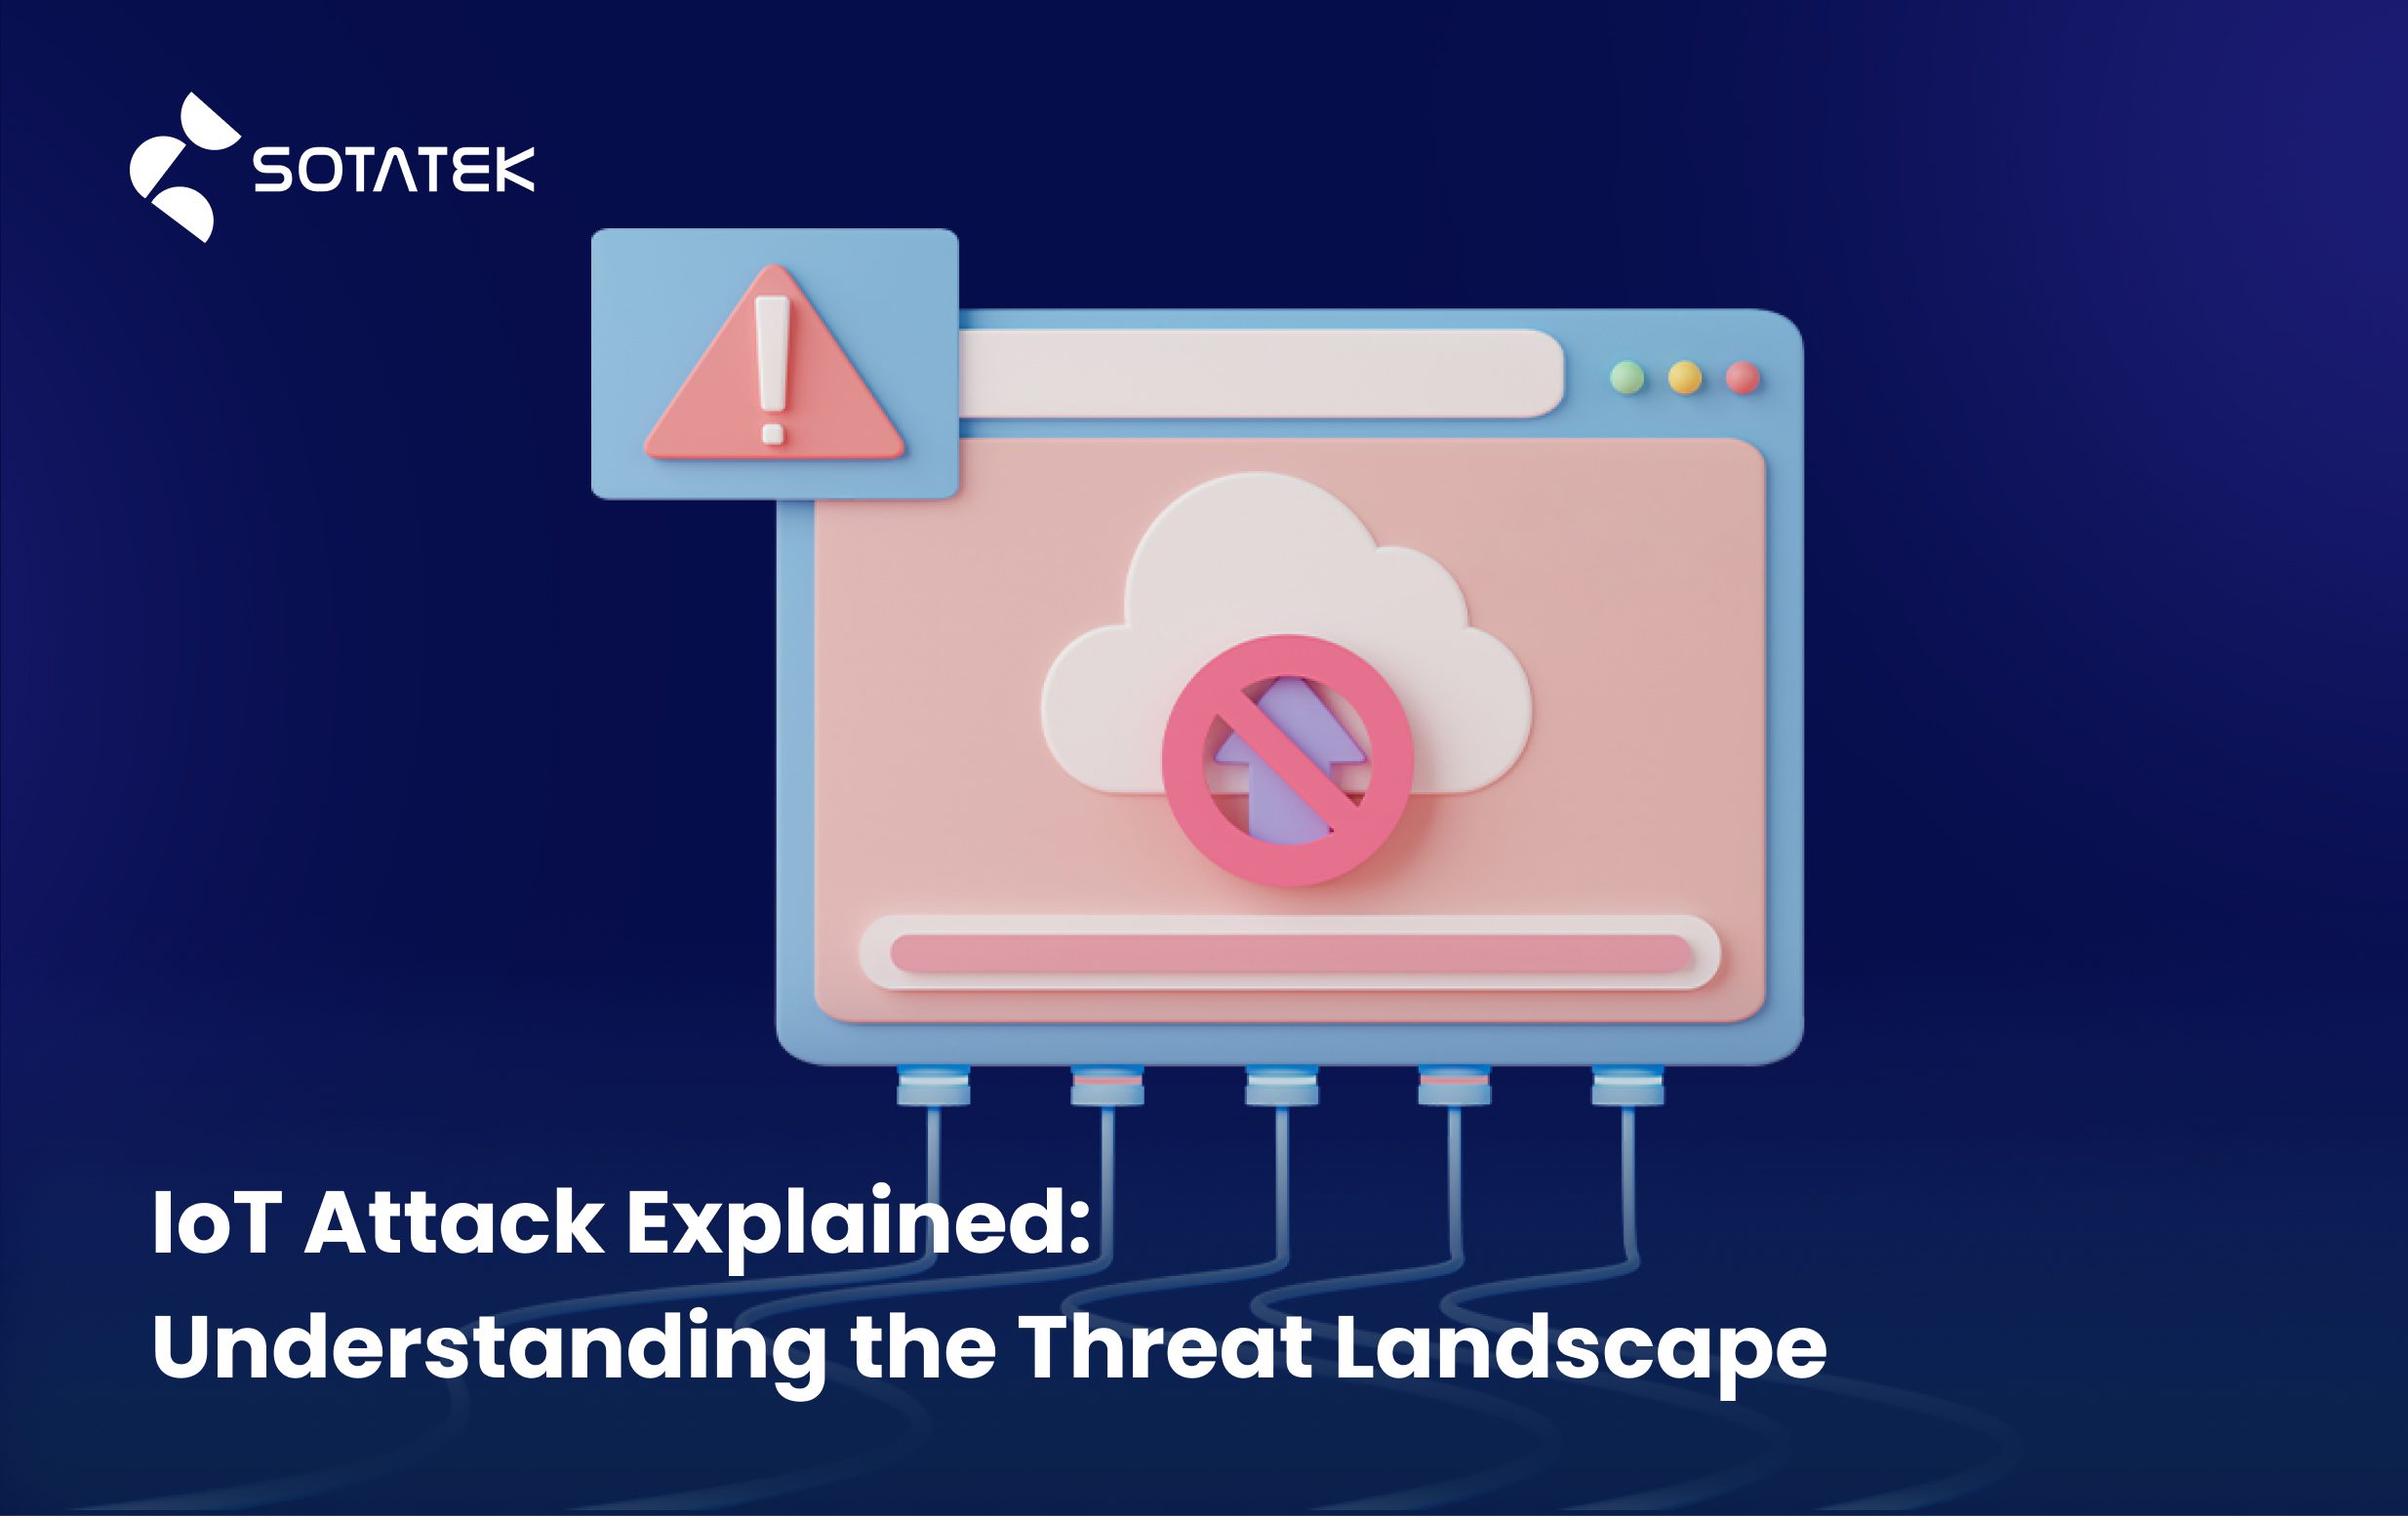 IoT Attack Explained: Understanding the Threat Landscape